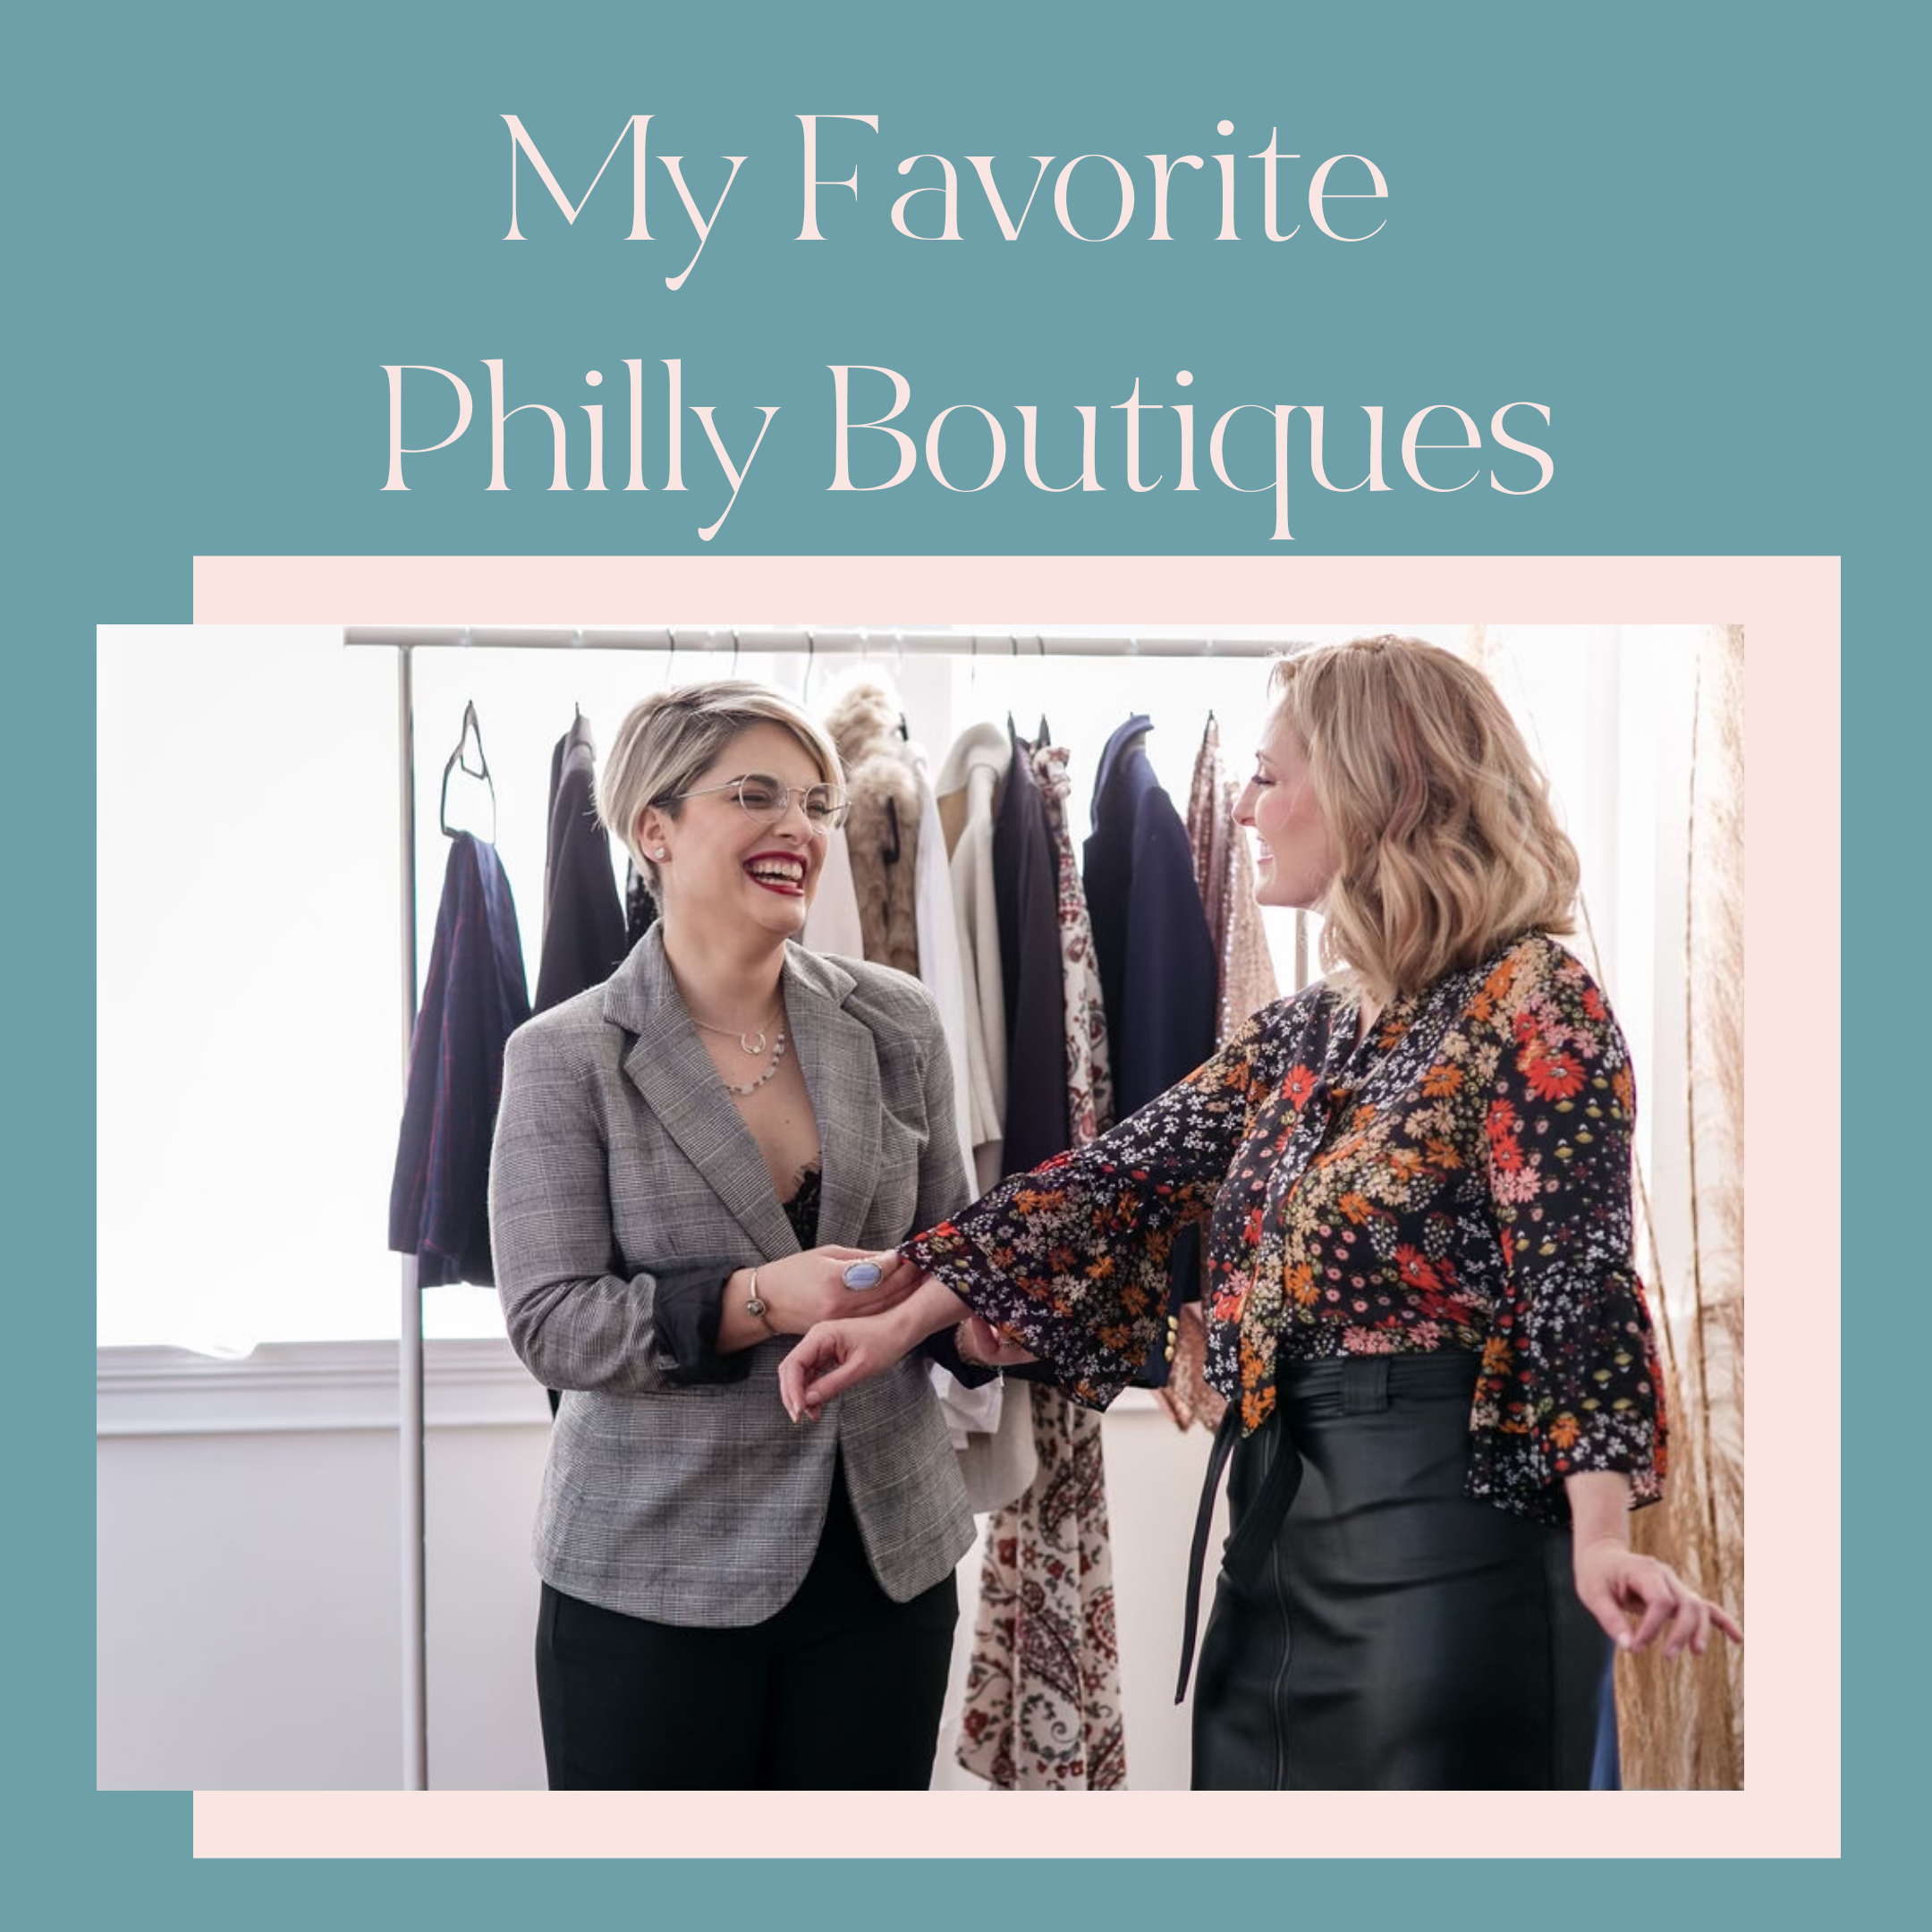 My Favorite Philly Boutiques